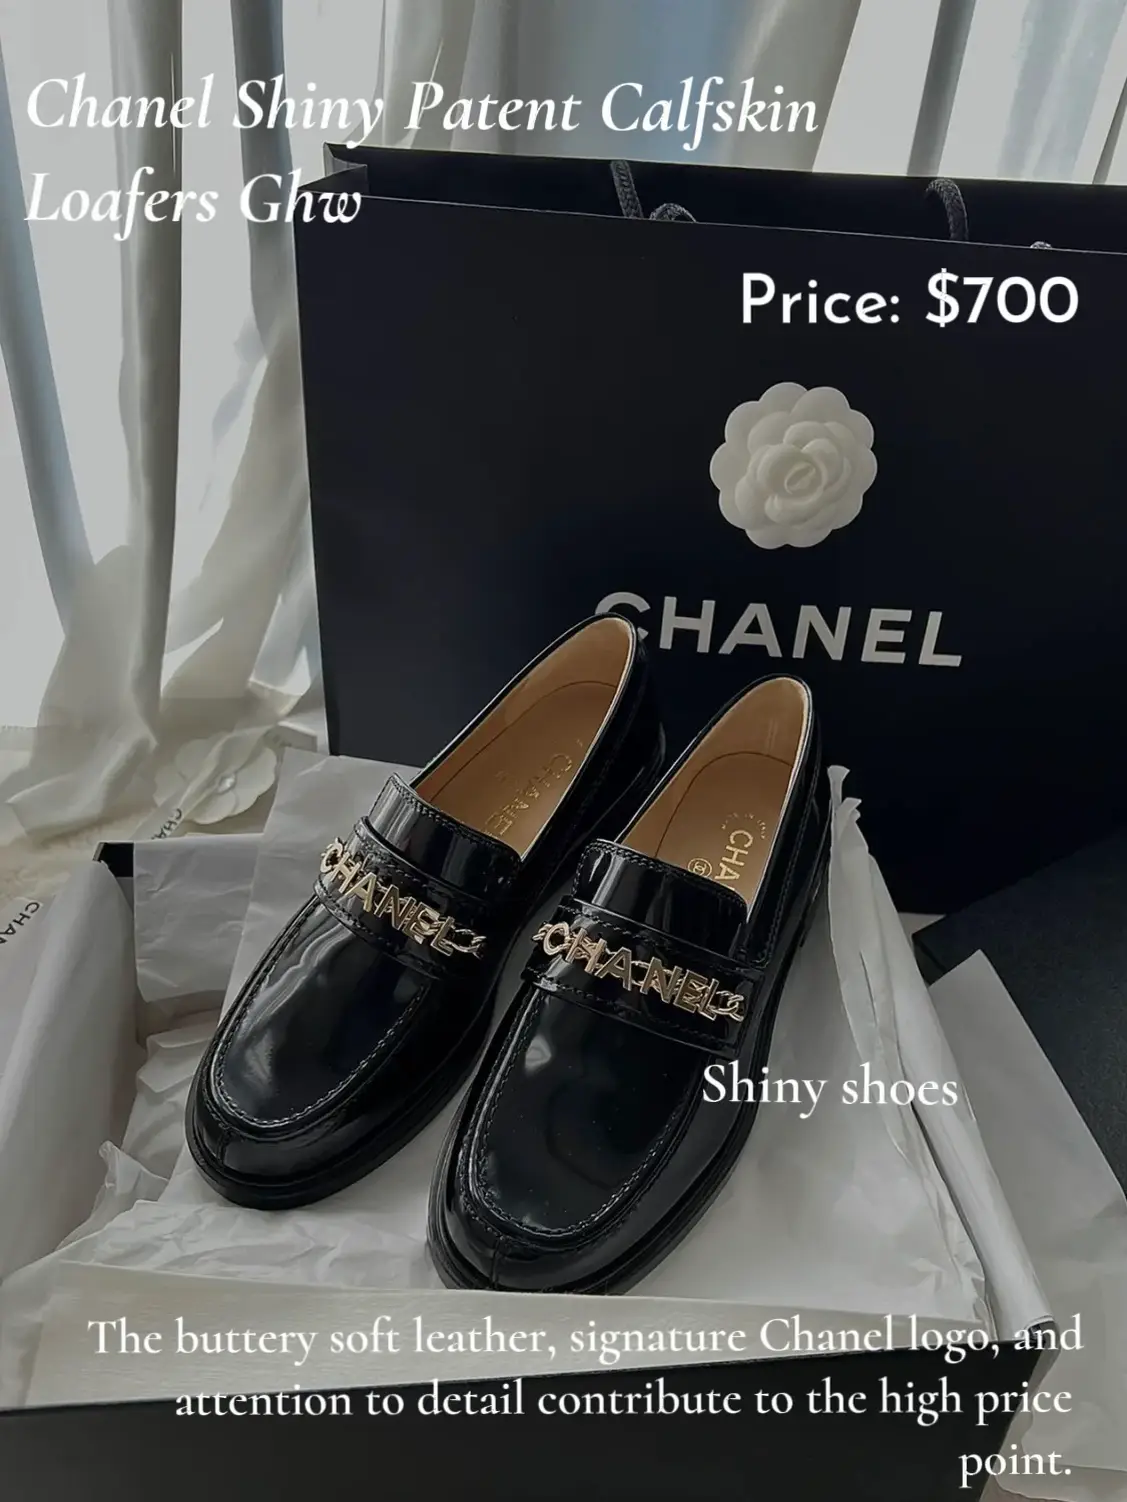 Reviewing Chanel Loafers, Gallery posted by Ashy Patterson